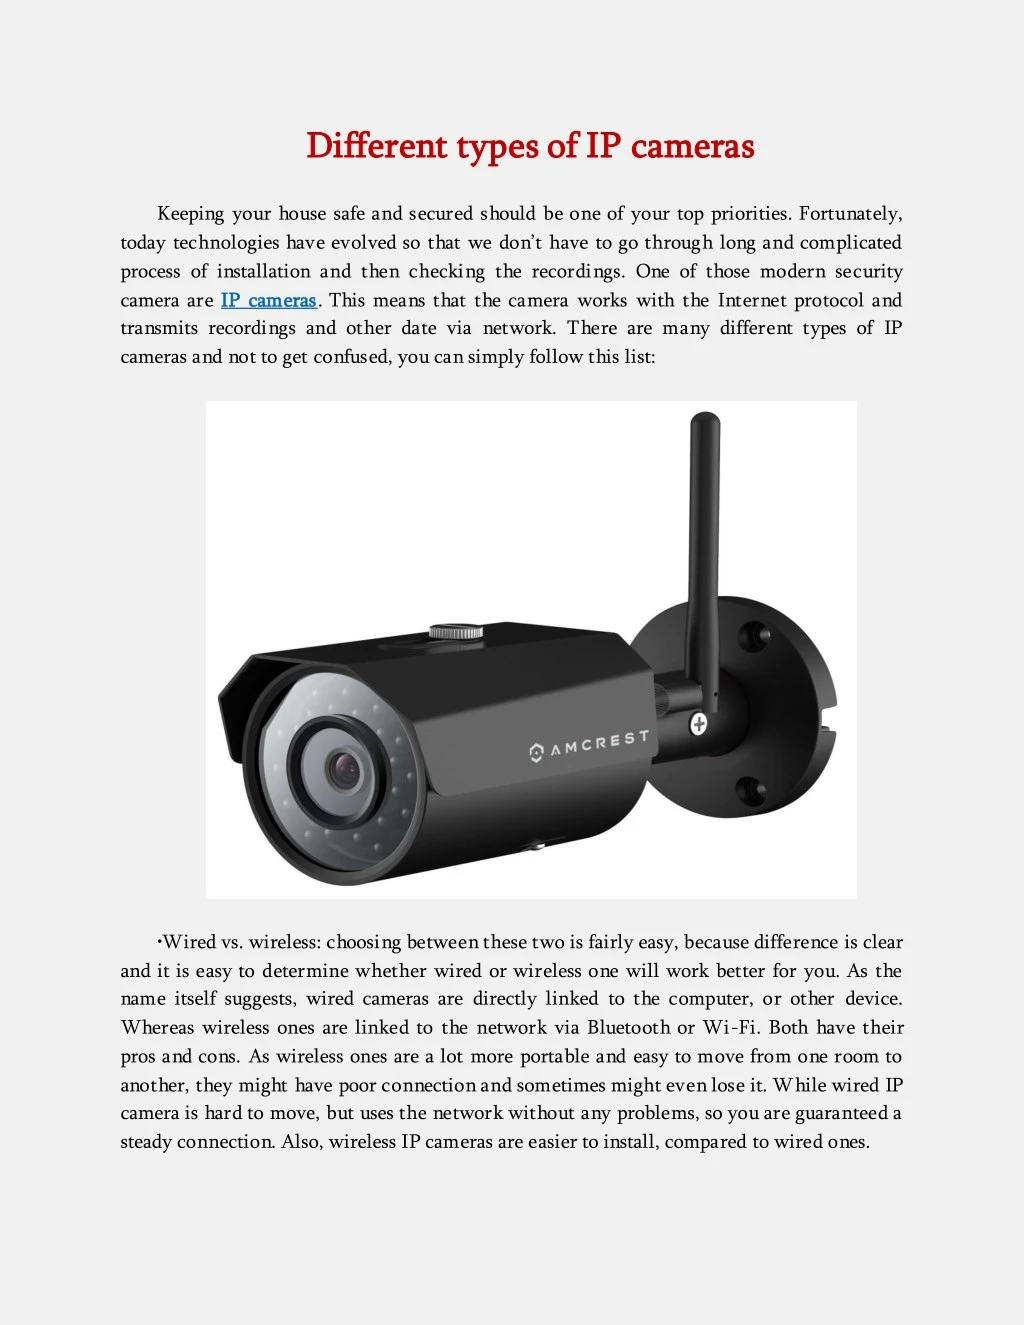 d different types of ip cameras ifferent types